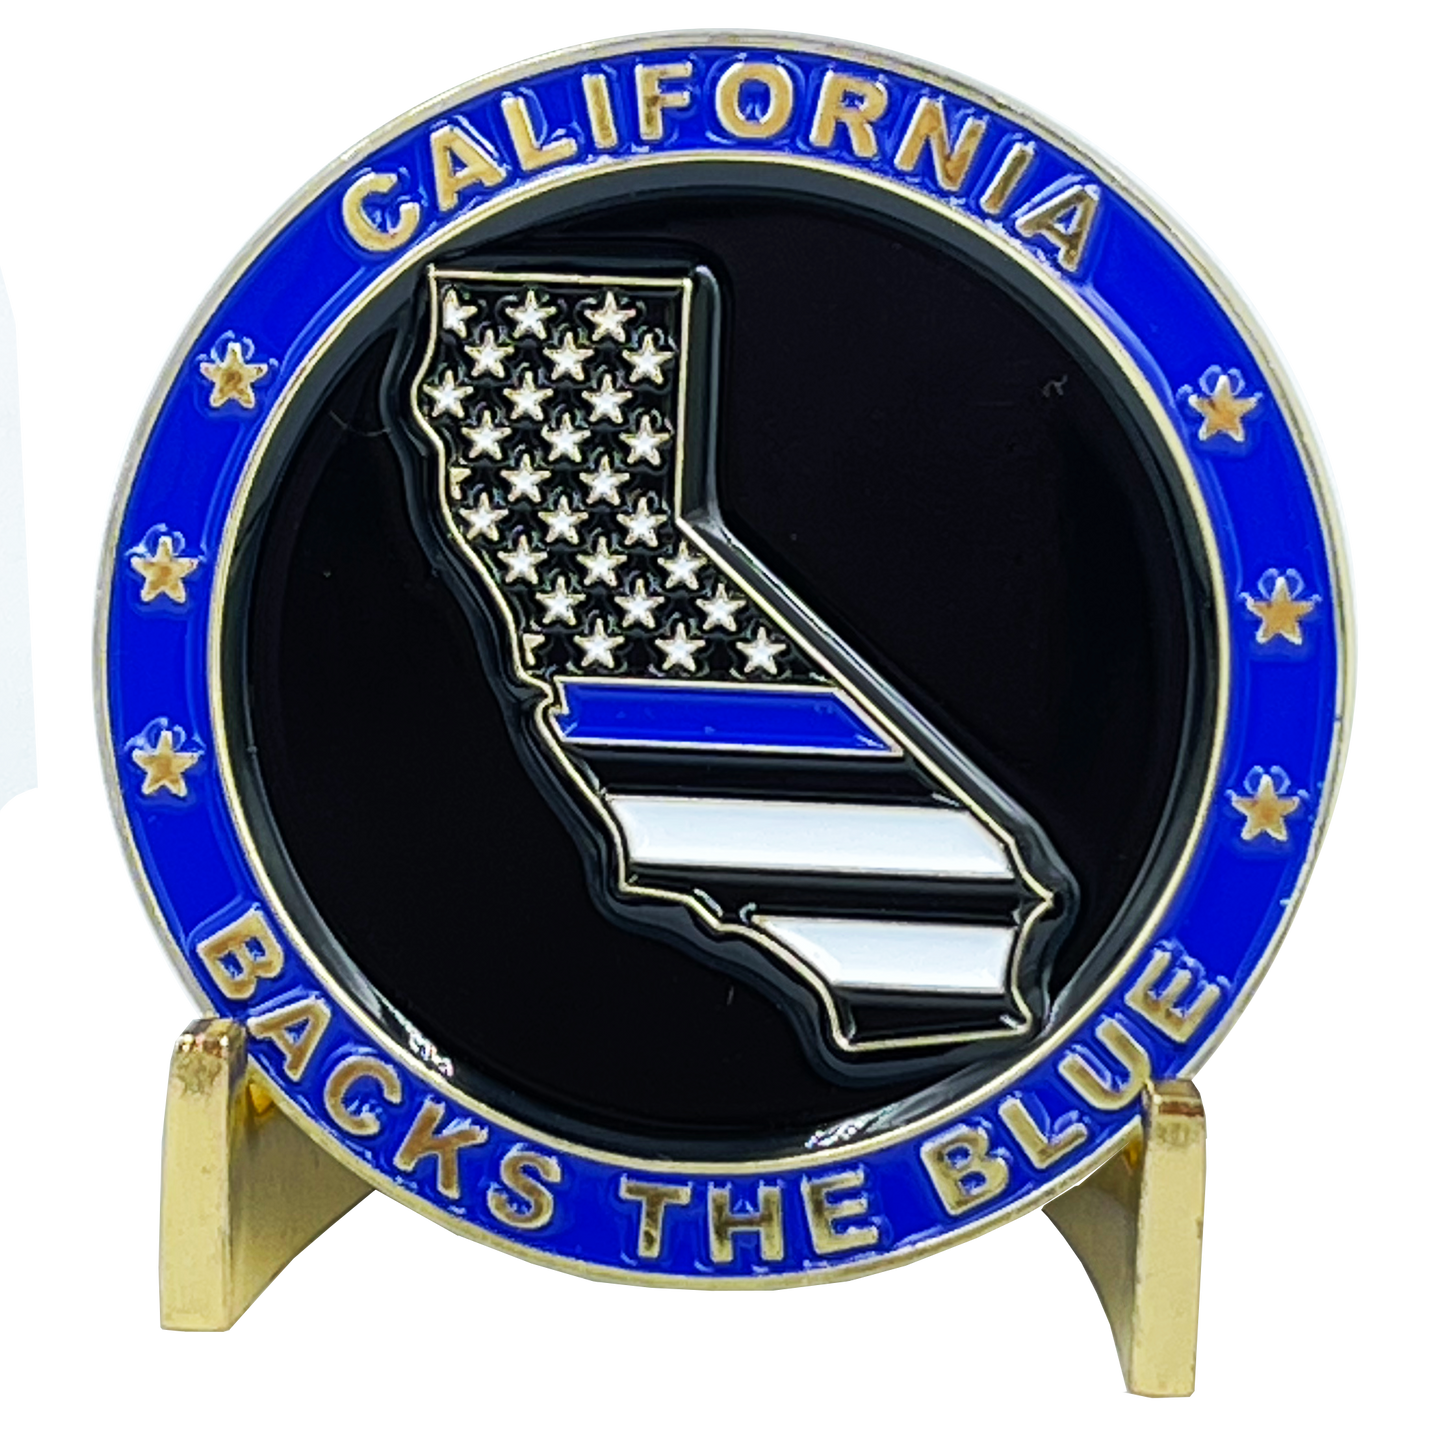 BL3-003 California BACKS THE BLUE Thin Blue Line Police Challenge Coin with free matching State Flag pin back the blue Sheriff LAPD CHP San Diego trooper